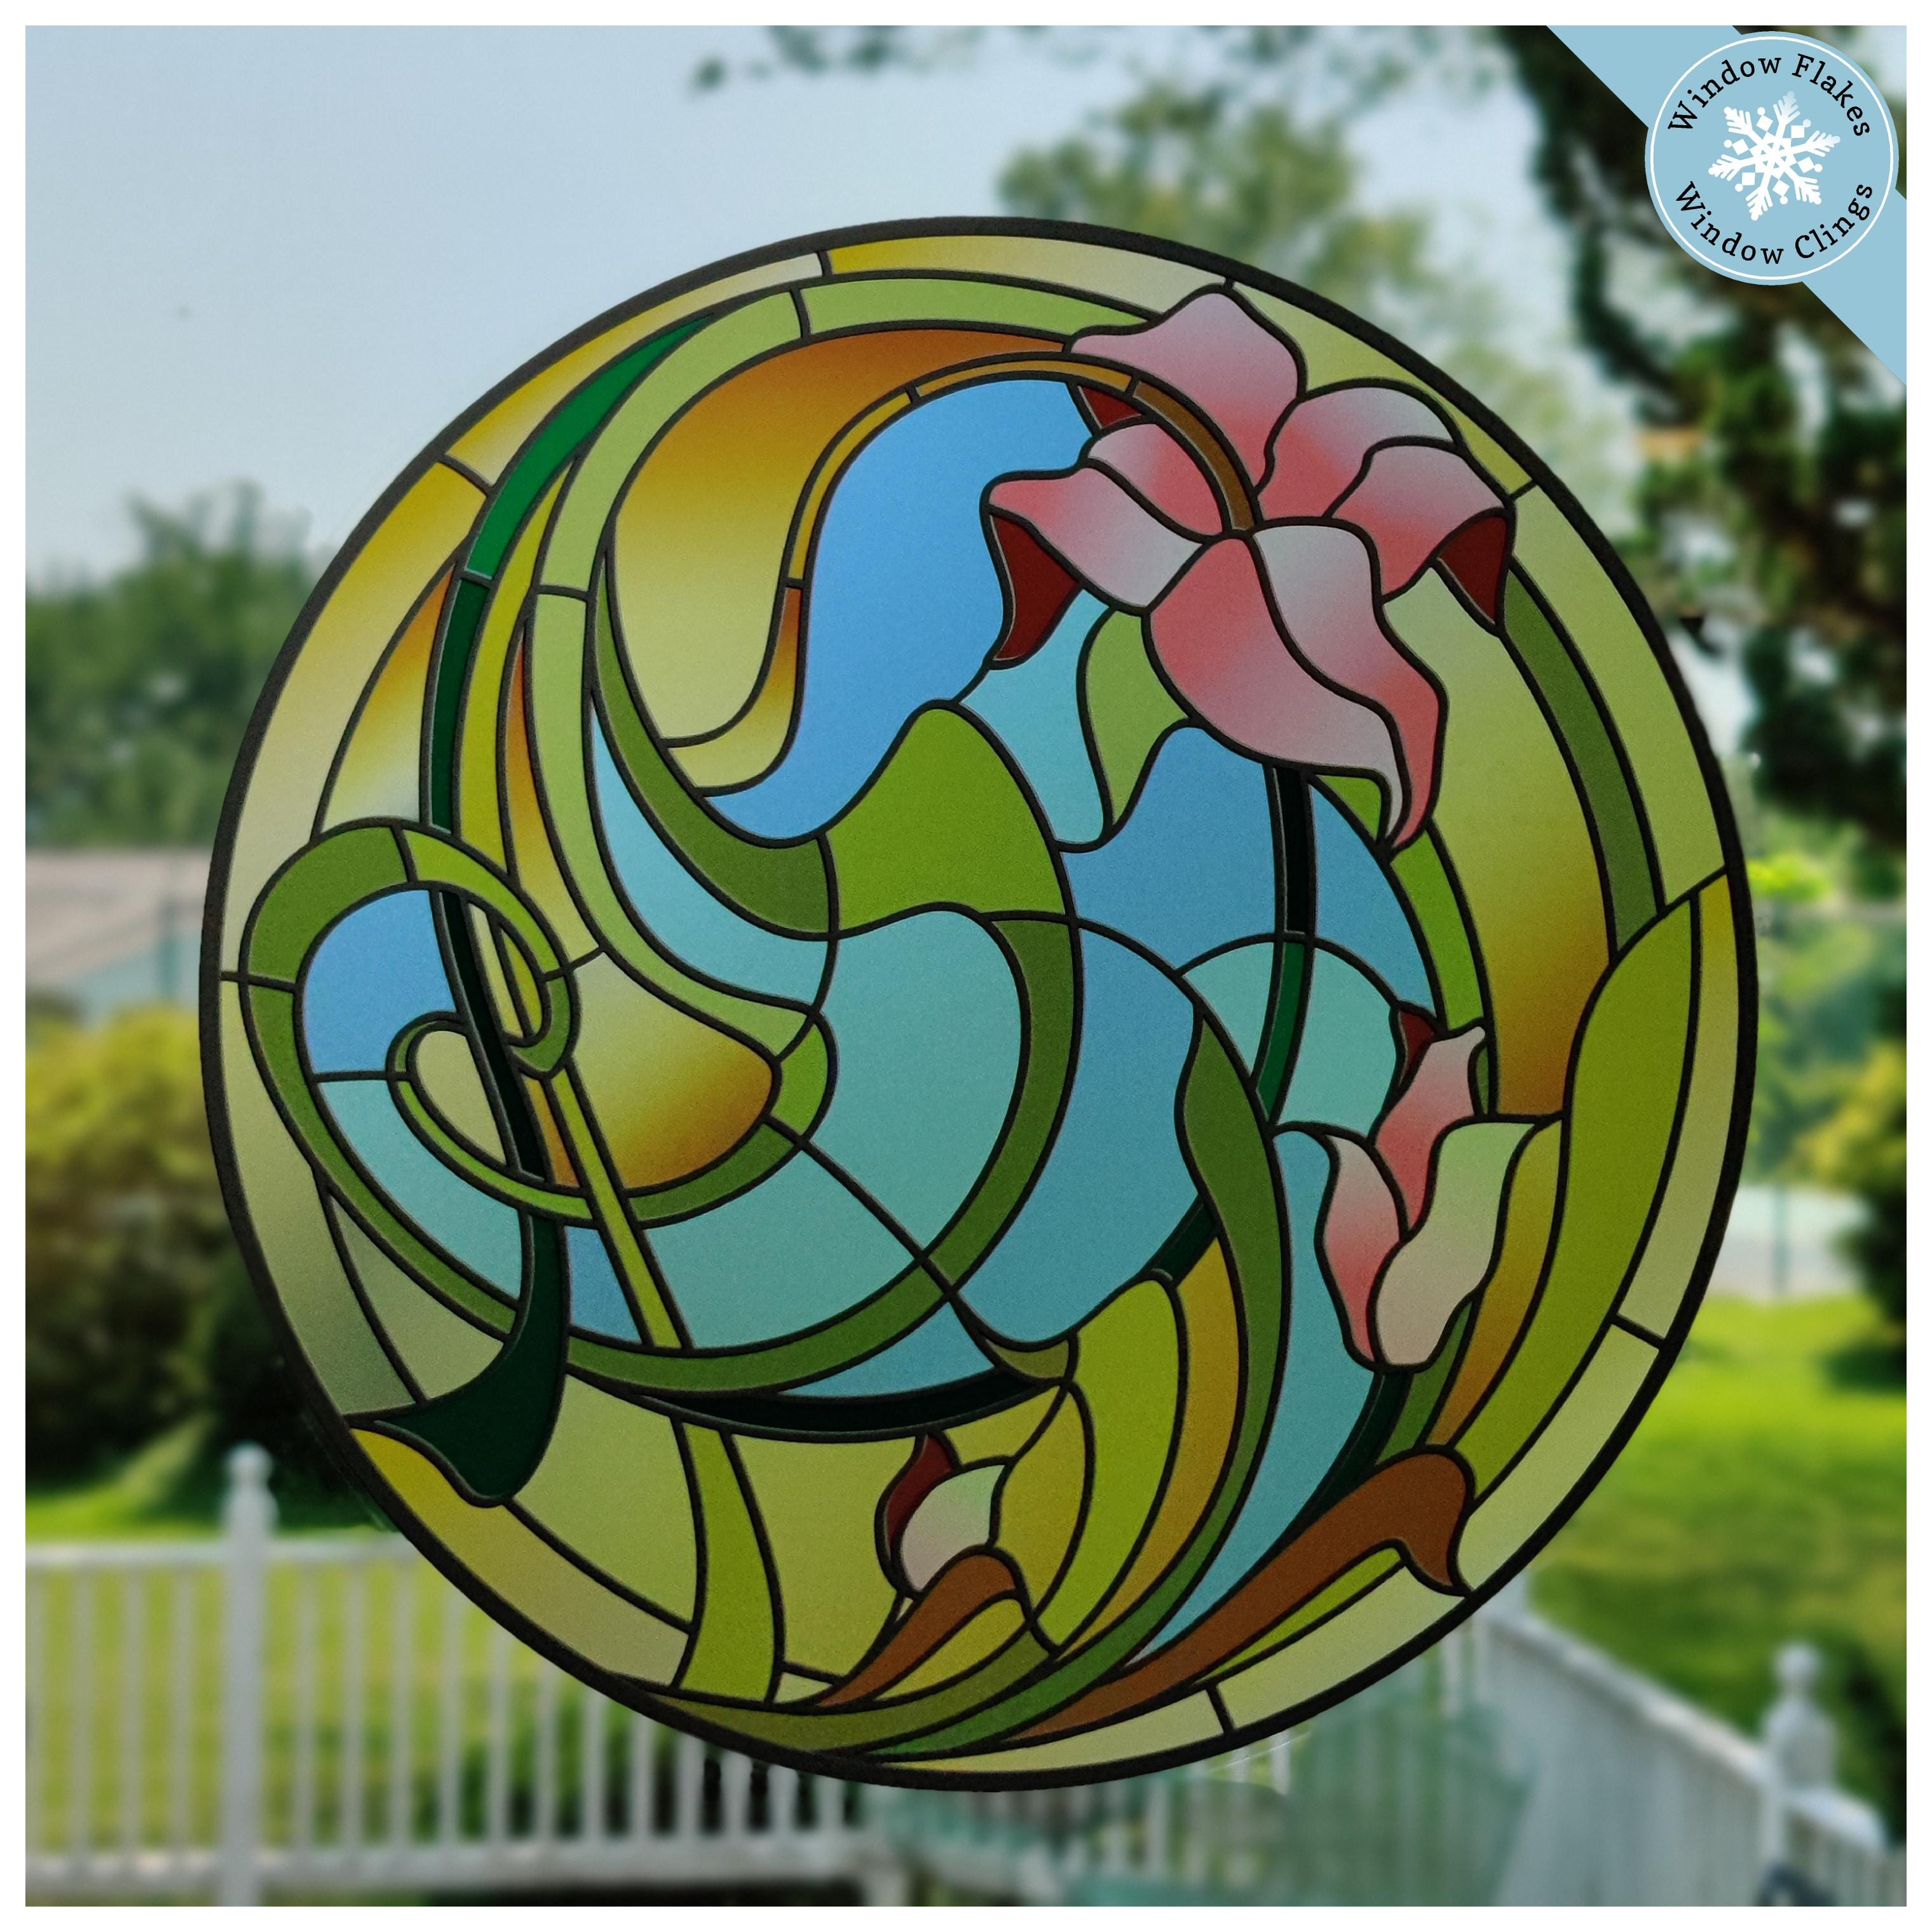 Lily Sun Catcher Stained Glass Window Cling – Window Flakes